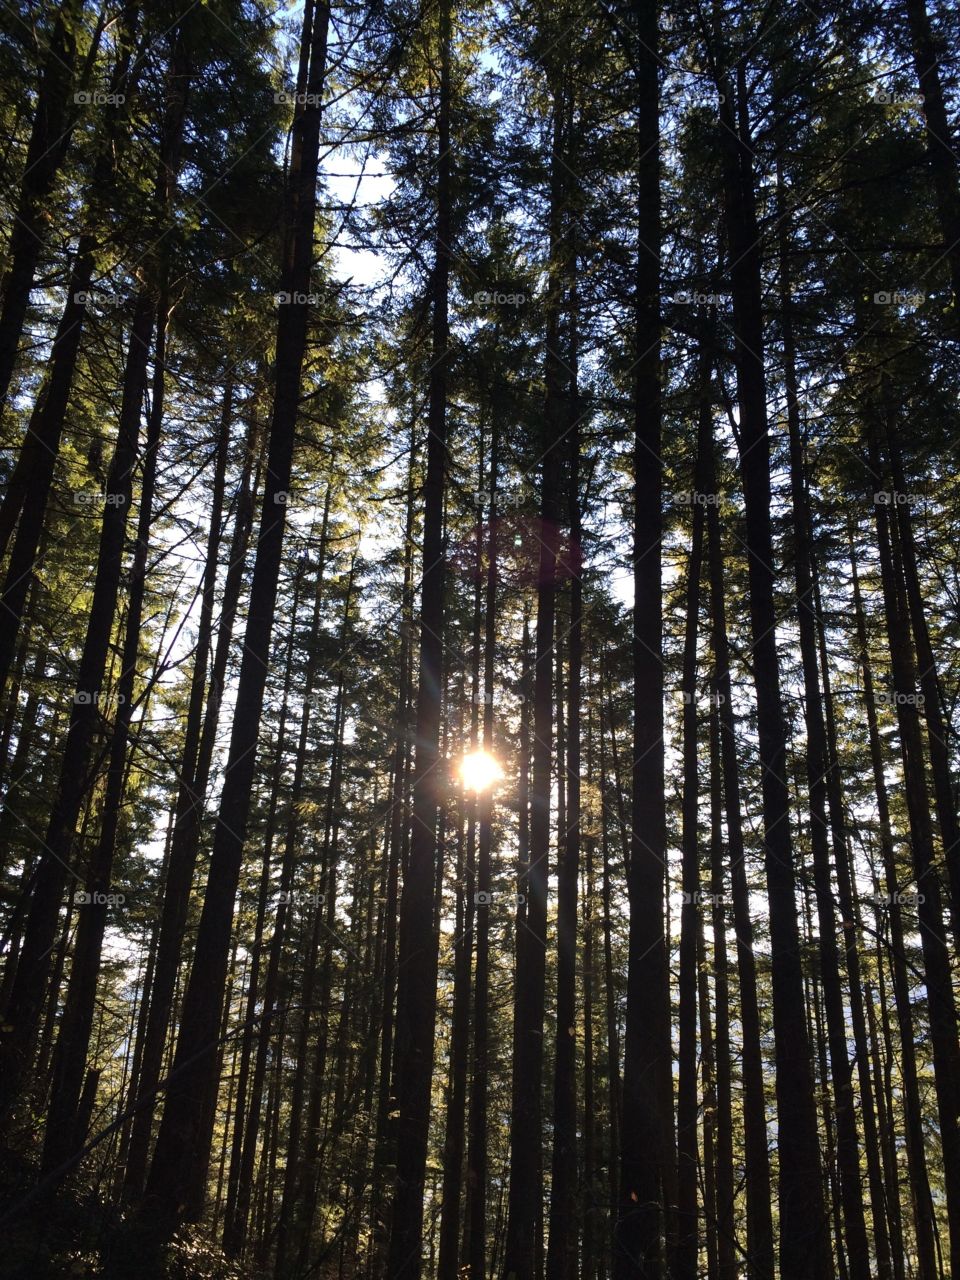 Sun shining through silhouette of trees on a hike.